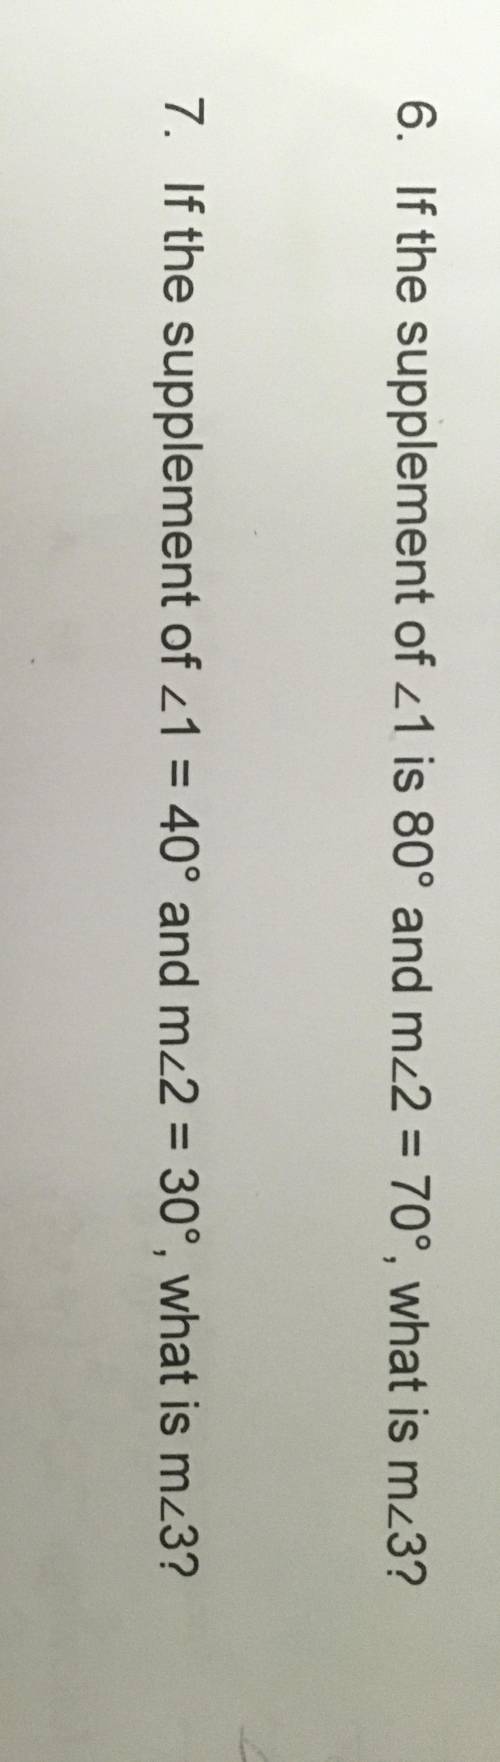 Please help me with these two questions. I put a picture with the questions